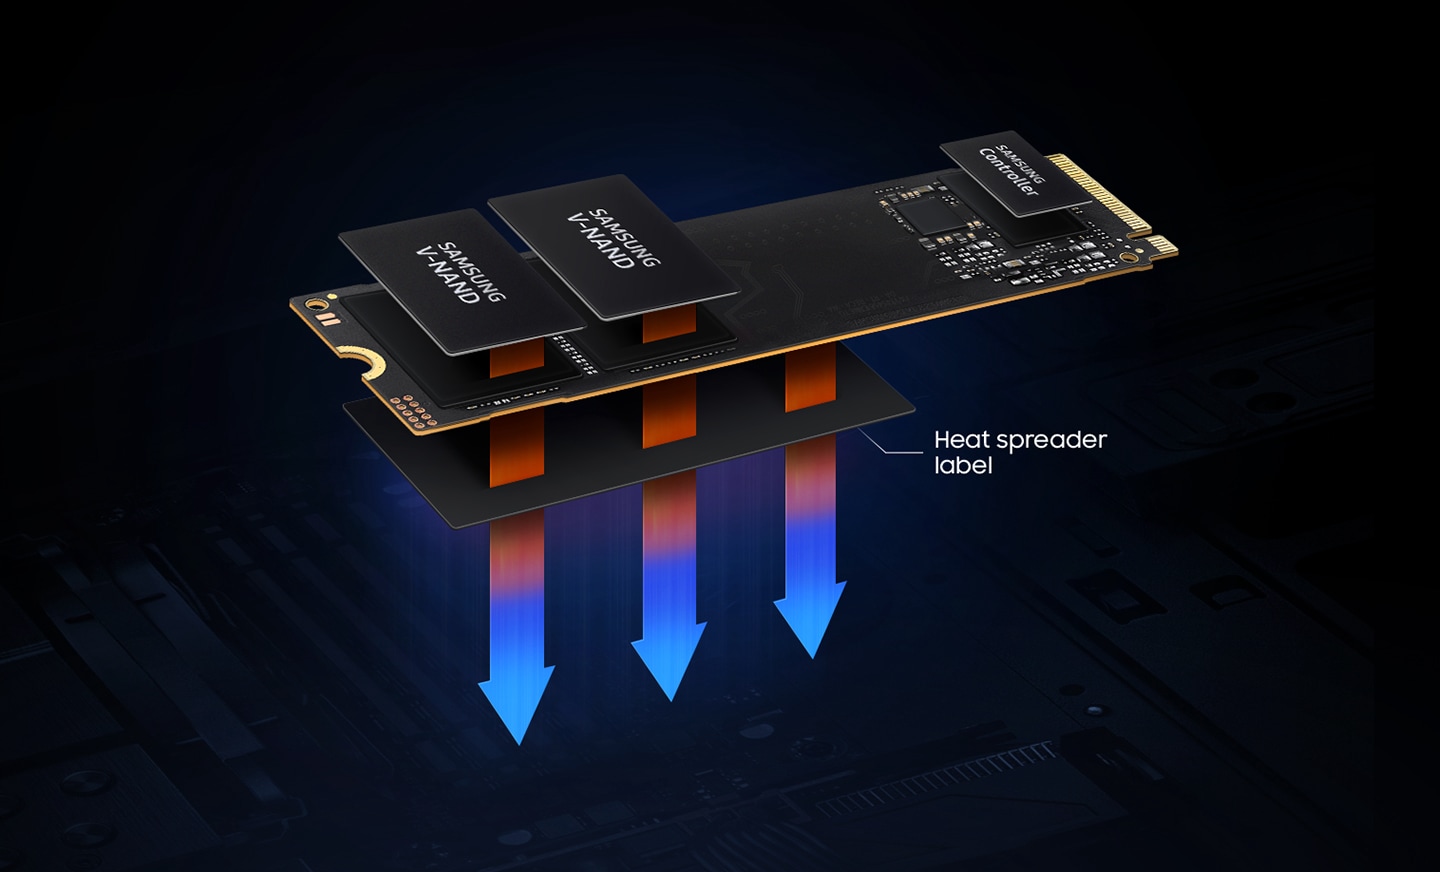 Heat is generated from the V-NAND and Controller, which are the main elements that make up the SSD. The heat spreader label controls the heat and maintains the performance of the SSD.